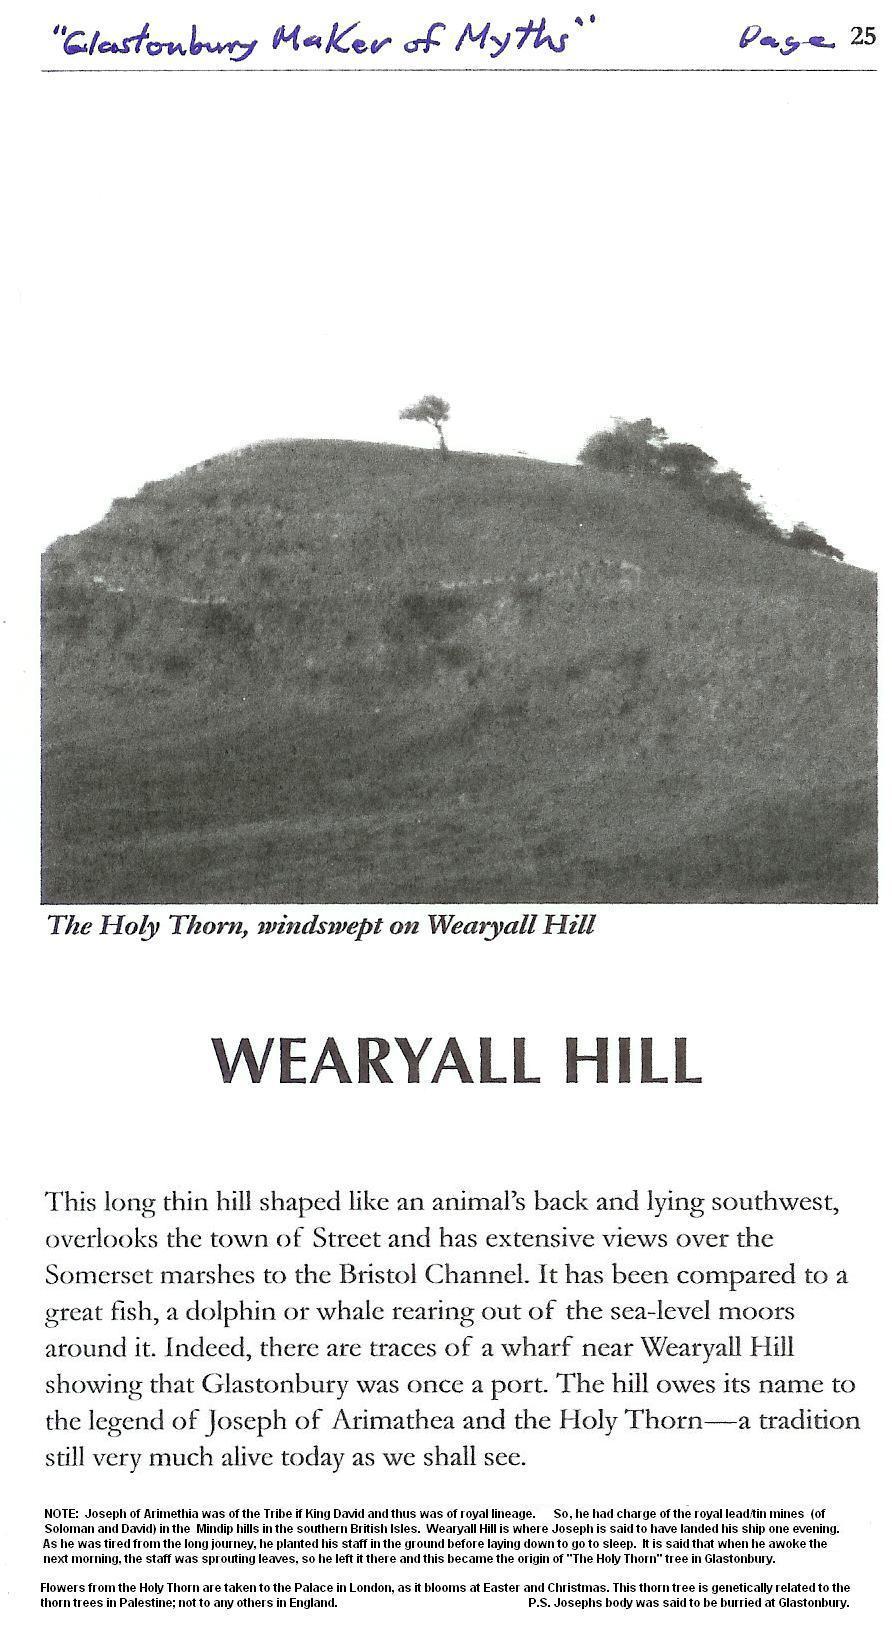 WEARYALL HILL On top stands the Holy Thorn tree! Is this the hill that Joseph of Arimethia docked by and slept on?